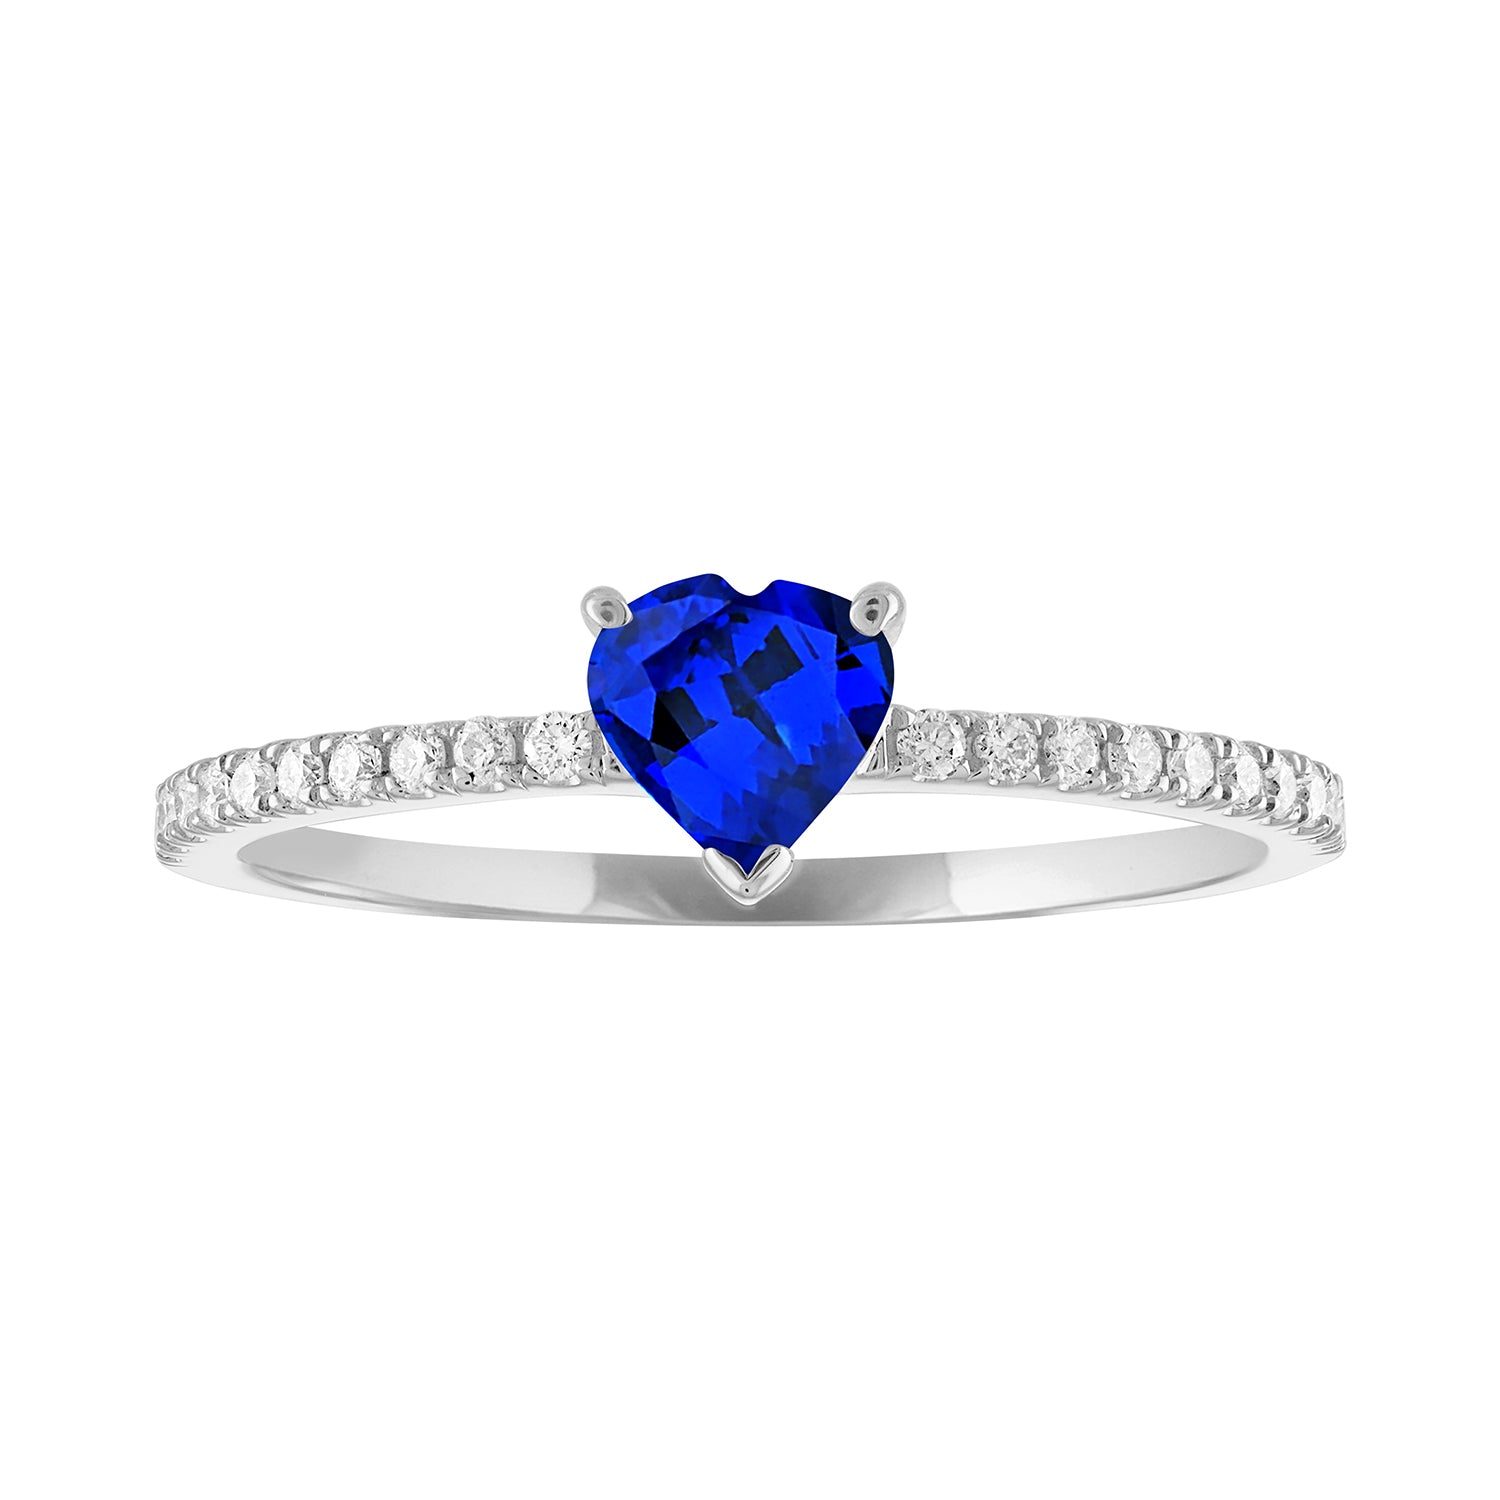 Thin banned white gold ring with heart shaped sapphire and round diamonds on the side 